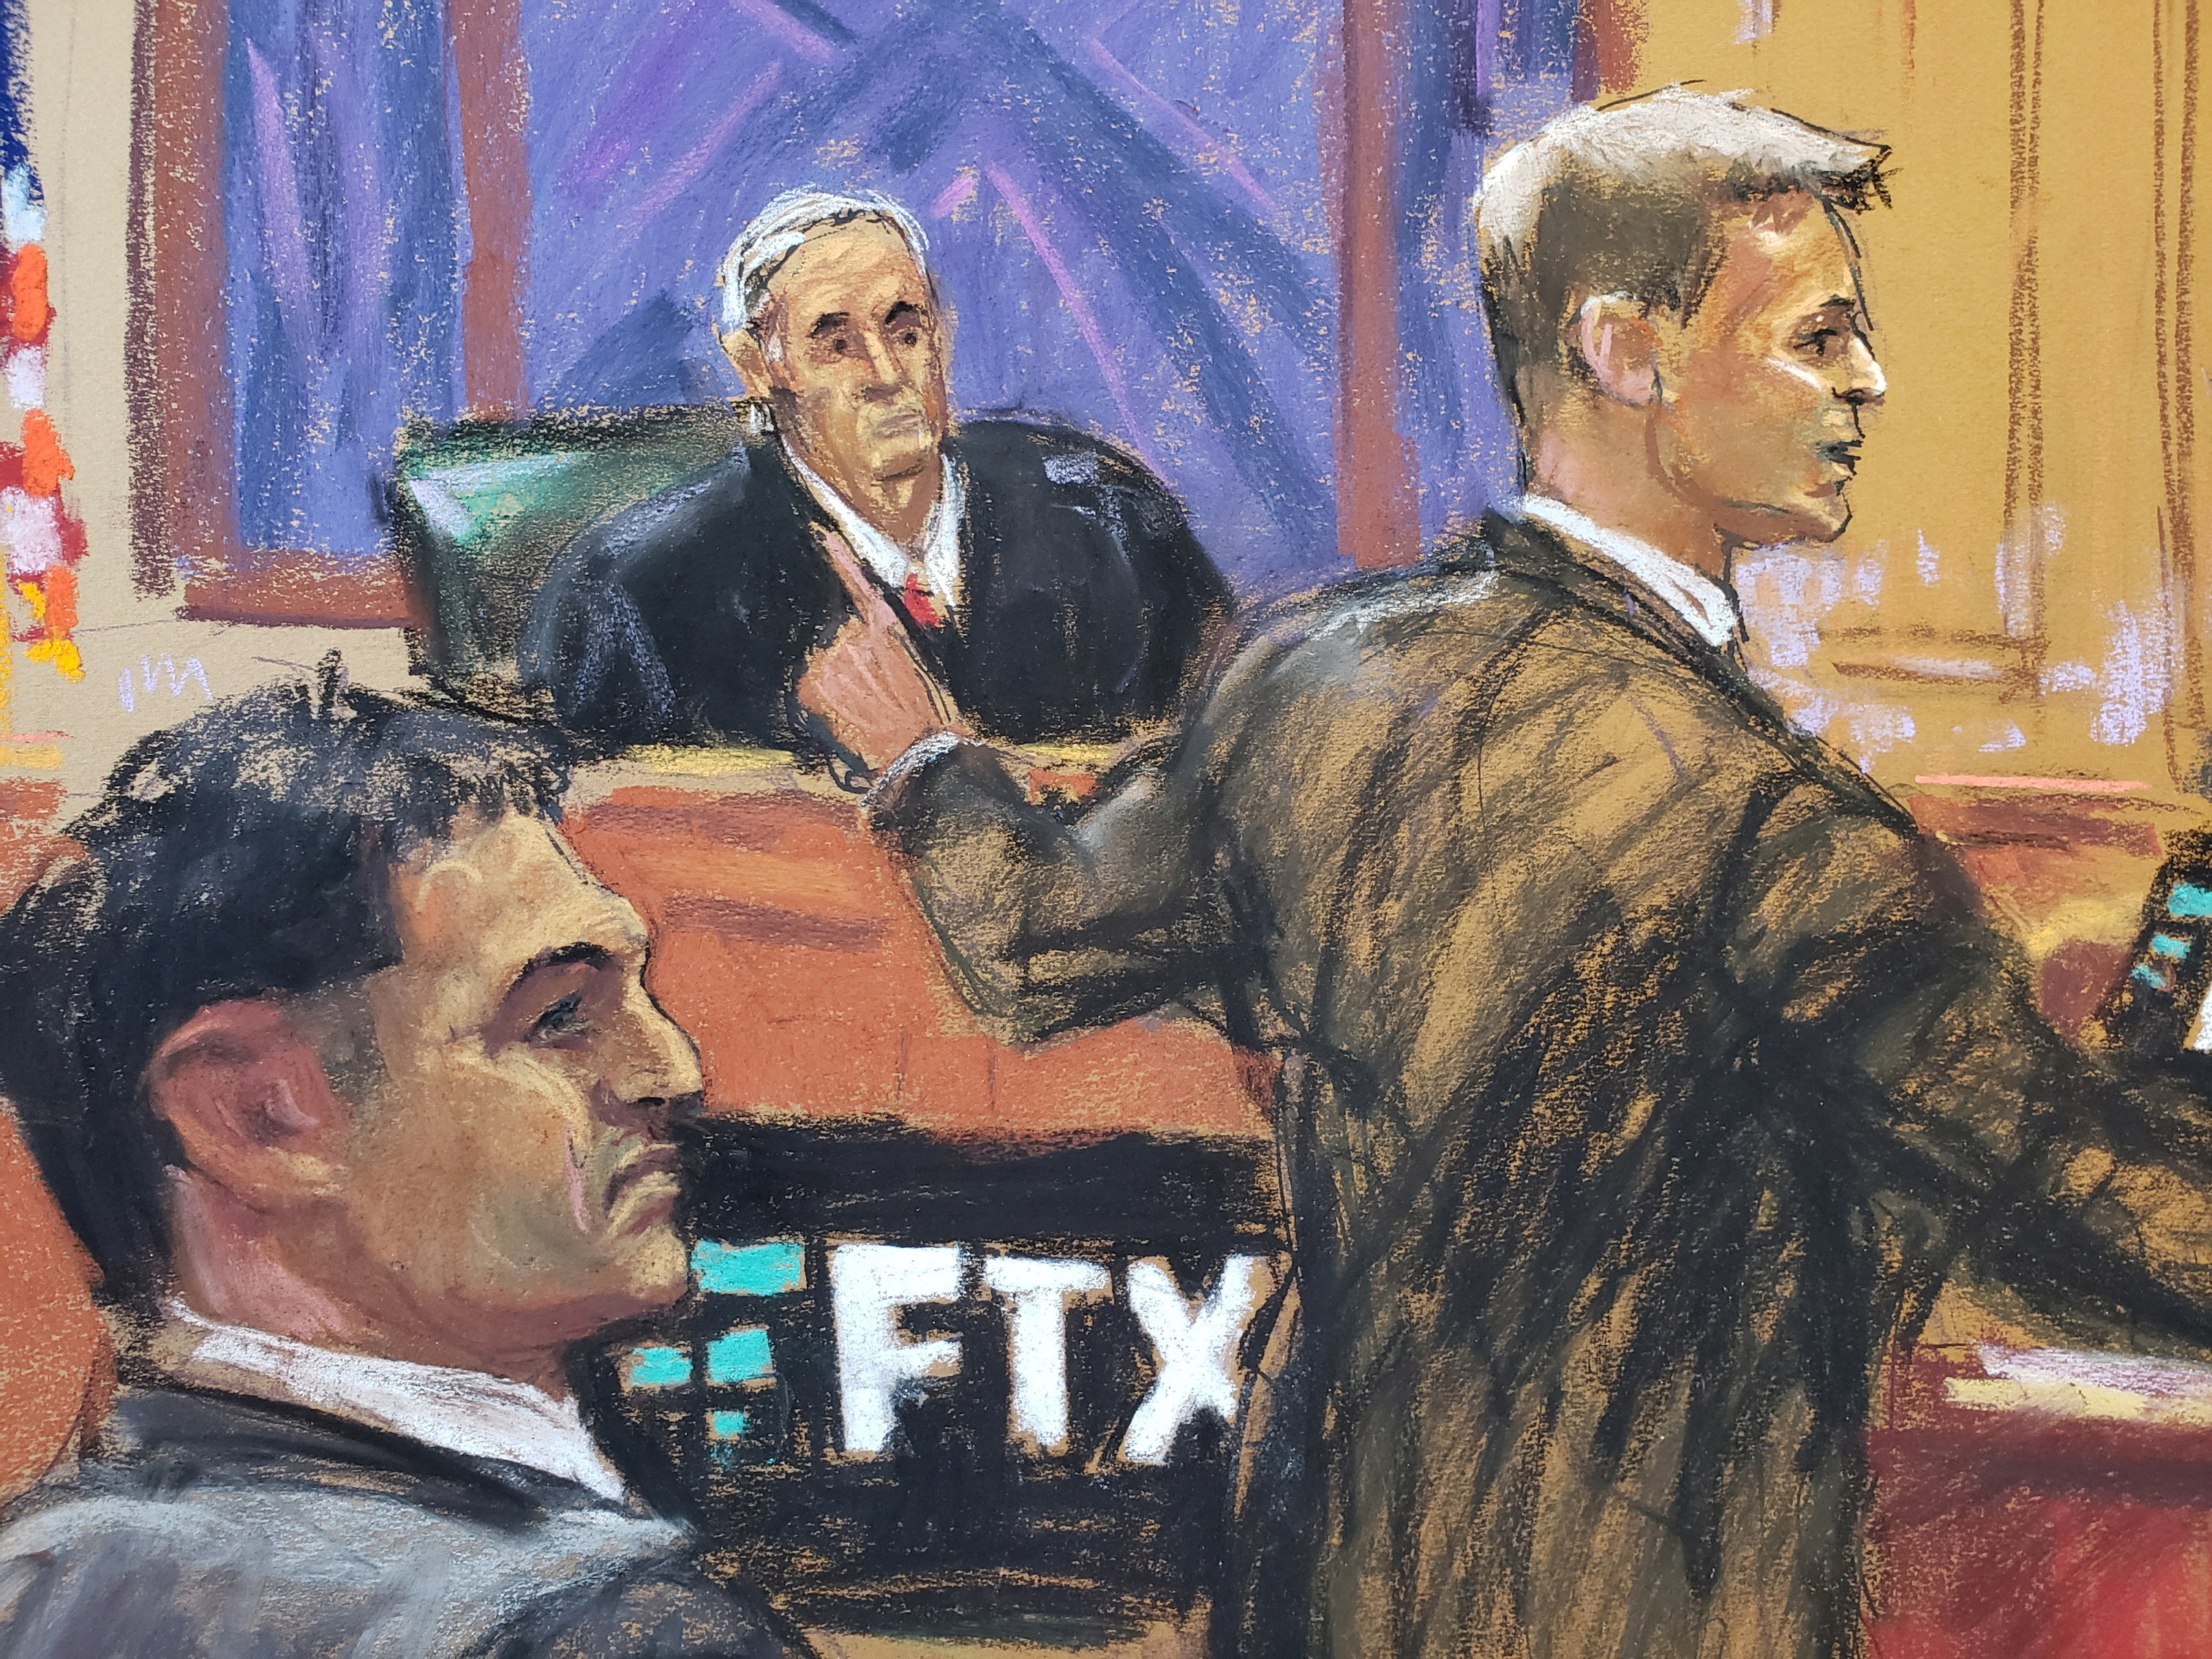 Sam Bankman-Fried watches as Assistant U.S. Attorney Thane Rehn makes his opening remark in Bankman-Fried's fraud trial over the collapse of FTX, the bankrupt cryptocurrency exchange, at Federal Court in New York City, on October 4.